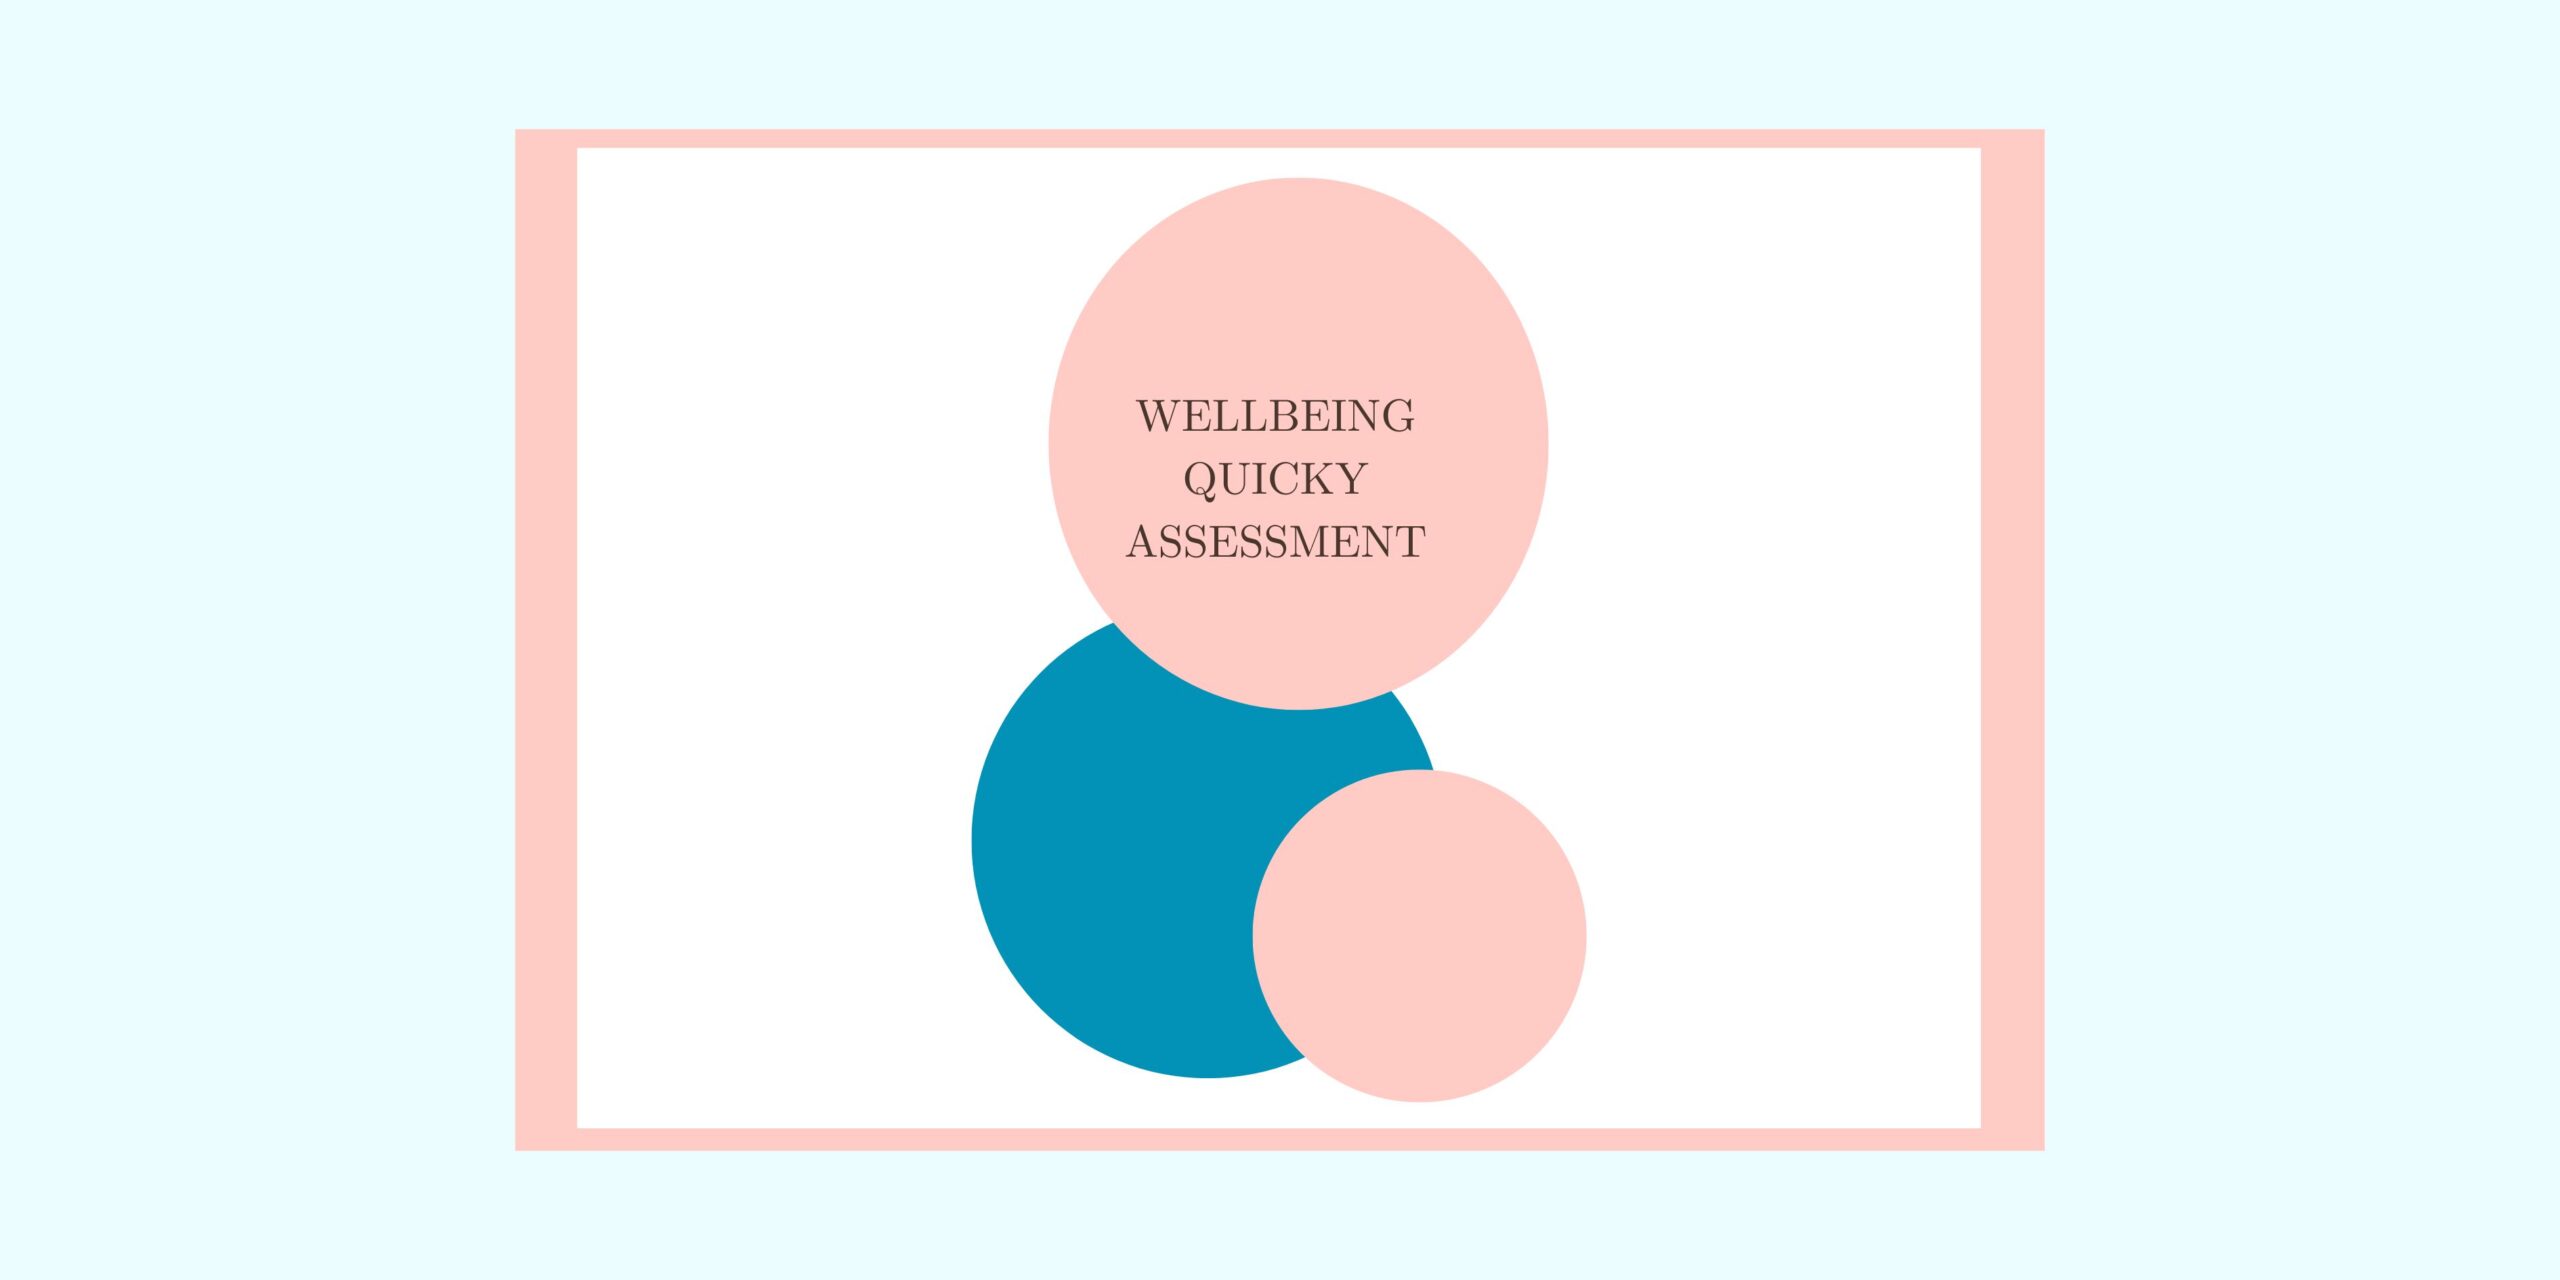 Wellbeing Quicky Assessment